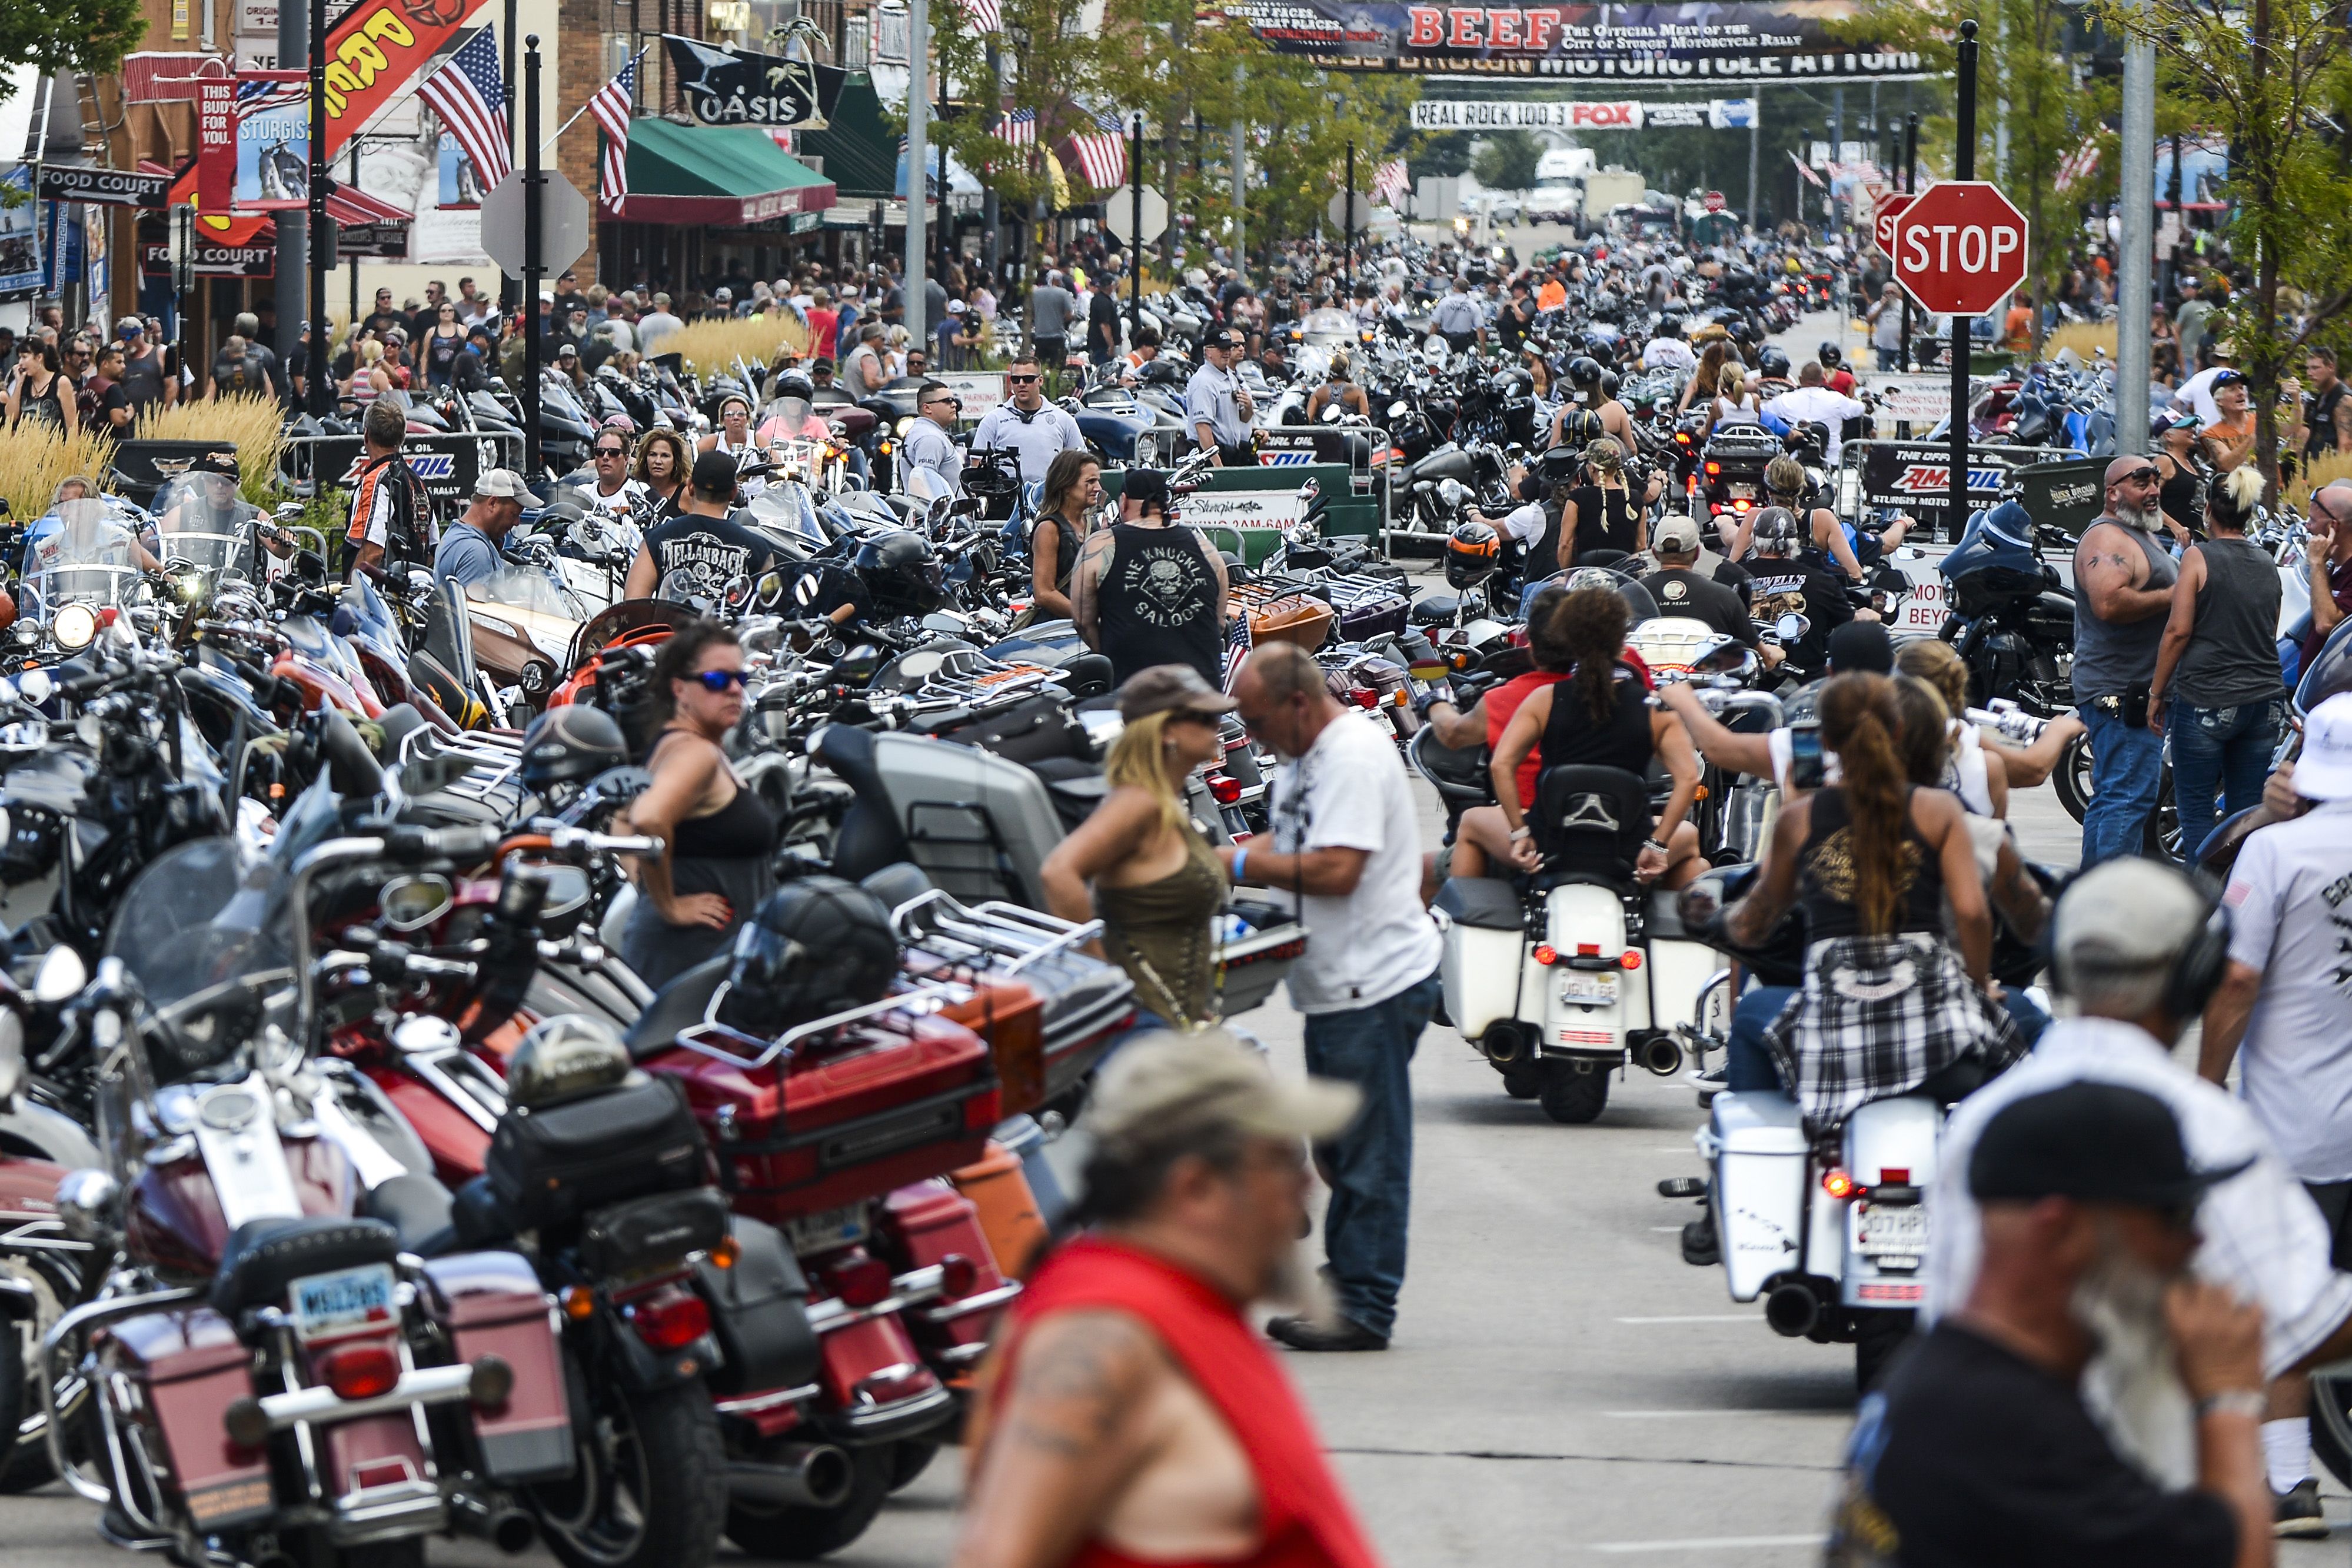 Motorcyclists in Sturgis on Aug. 7.